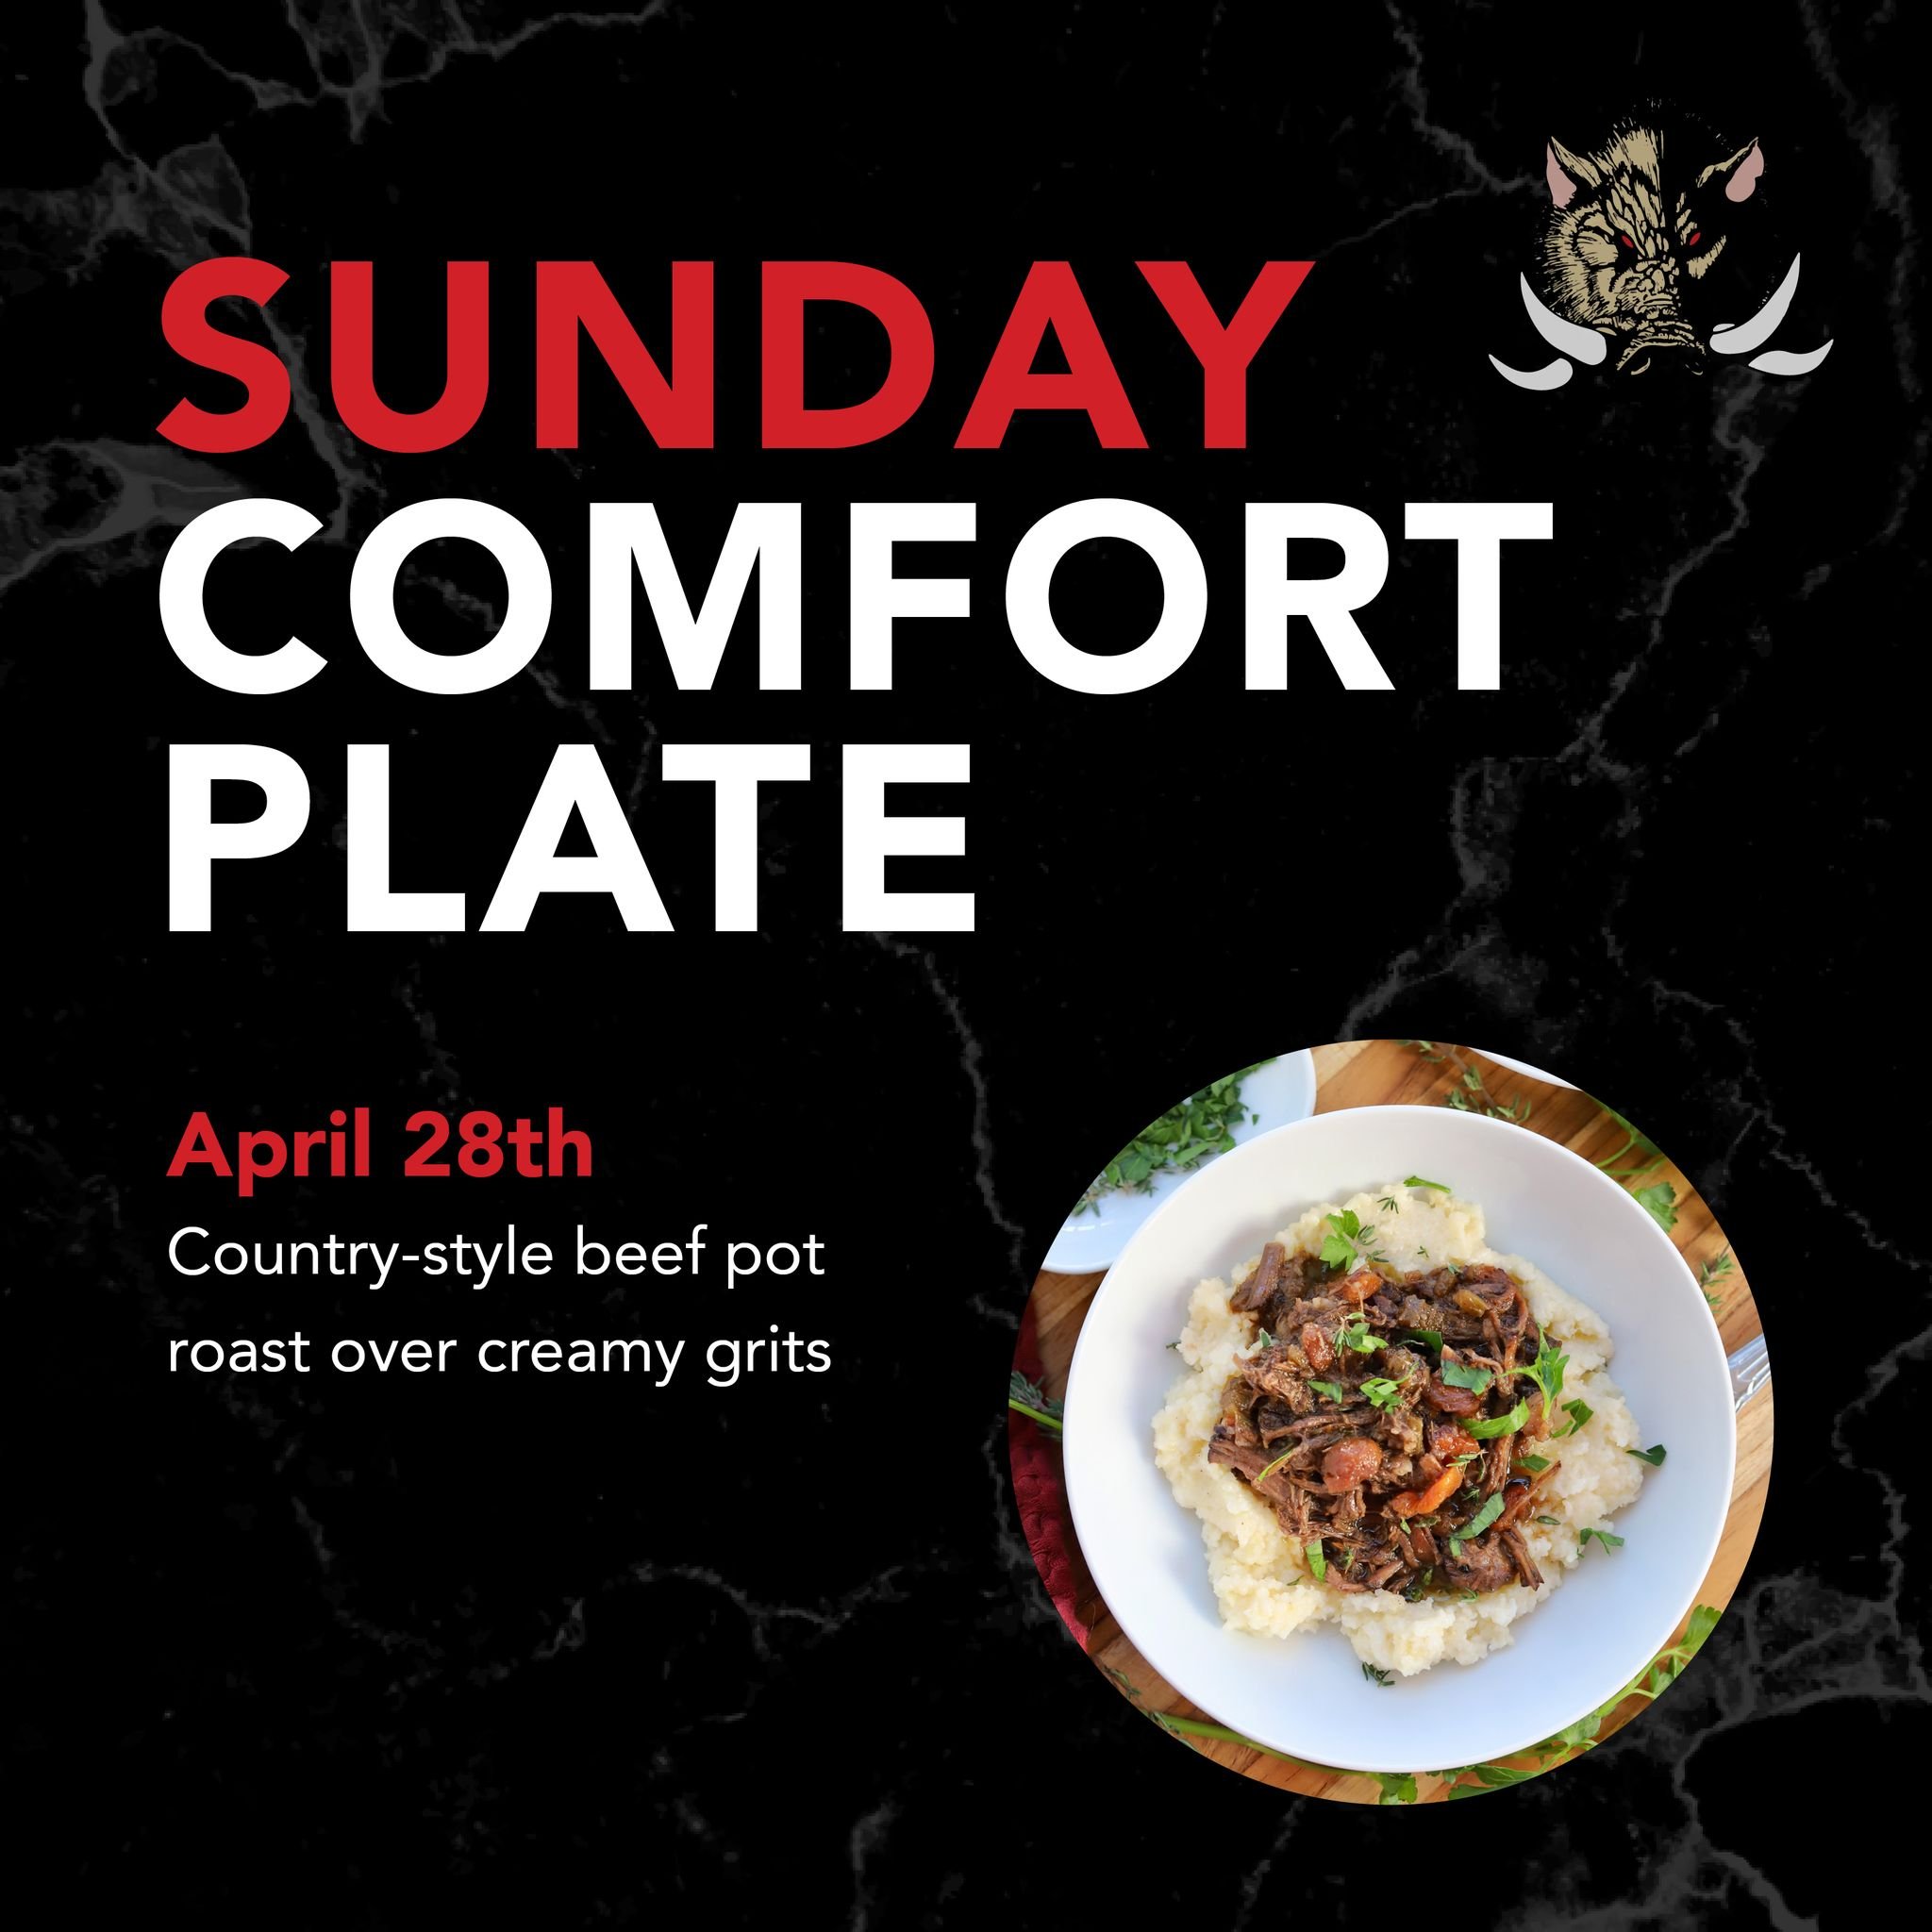 Craving some down-home comfort food? Join us at Mad Boar on April 28th for our Sunday Comfort Plate Special featuring irresistible country-style beef pot roast over creamy grits.  See you there! 😍 

#madboarnc #wallacenc #ComfortFoodCraving #sundays